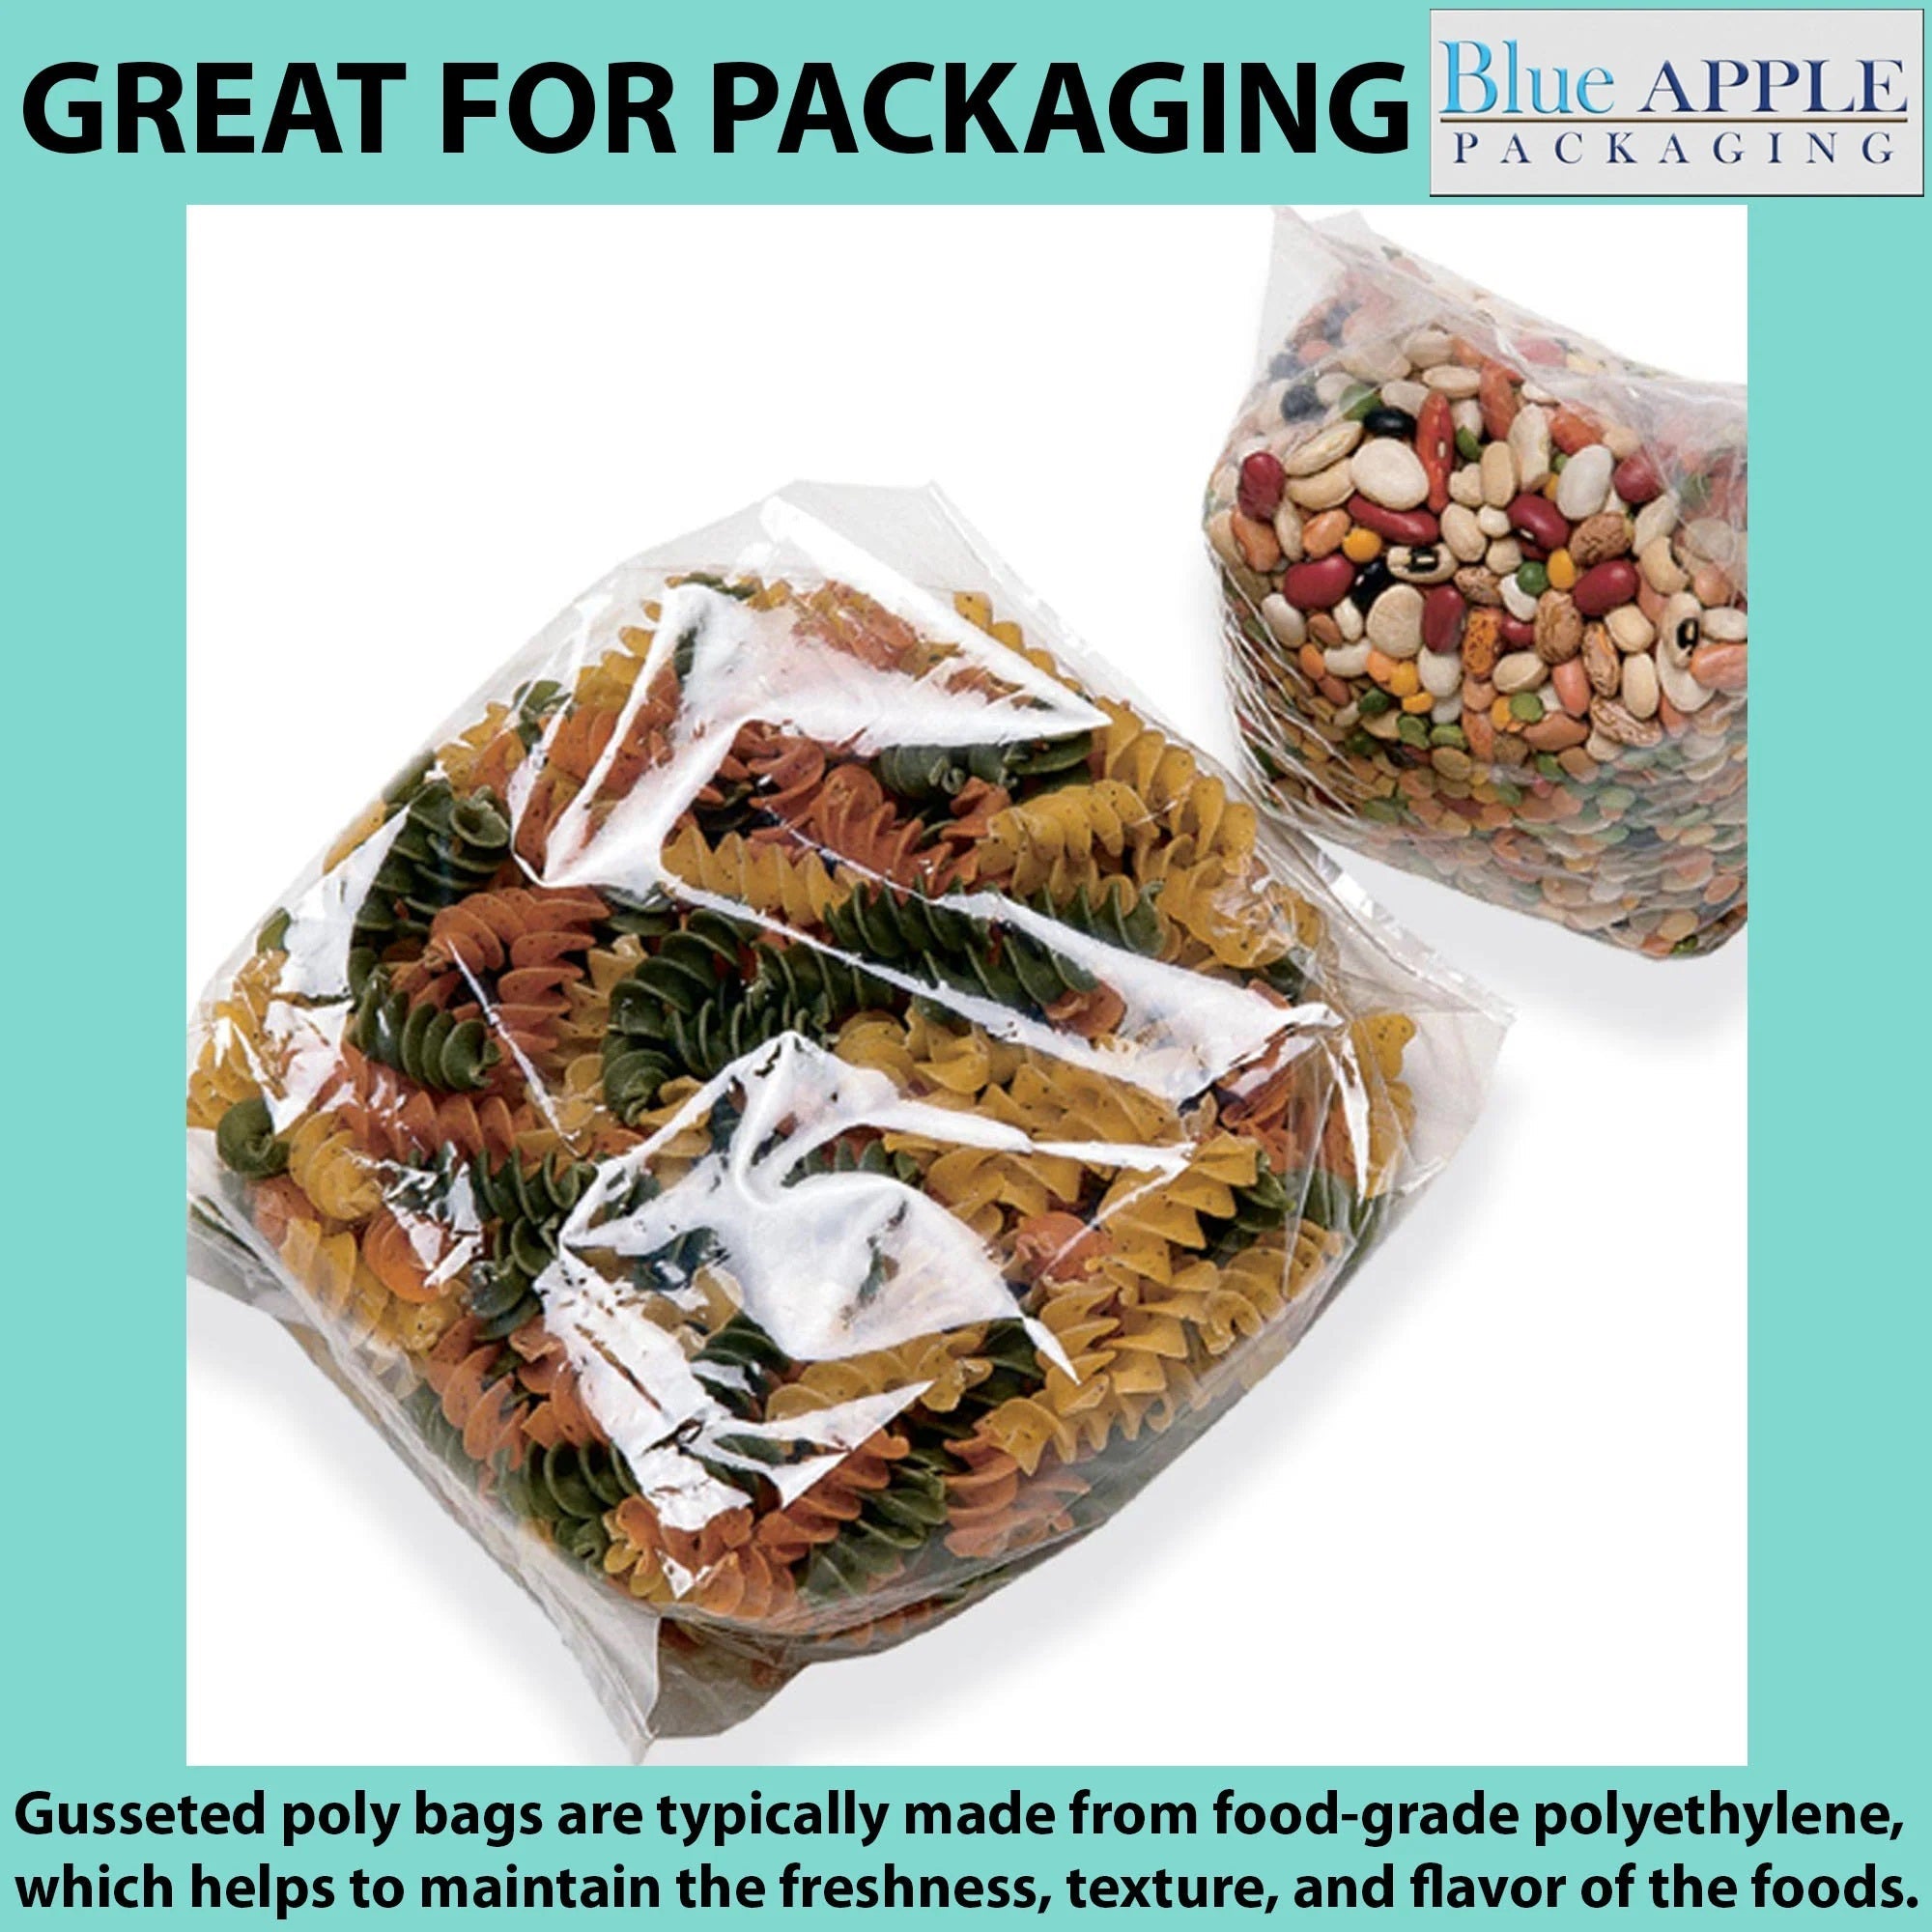 Gusseted Polypropylene Bags 1.5 Mil 12 inch X 8 inch X 30 inch Size